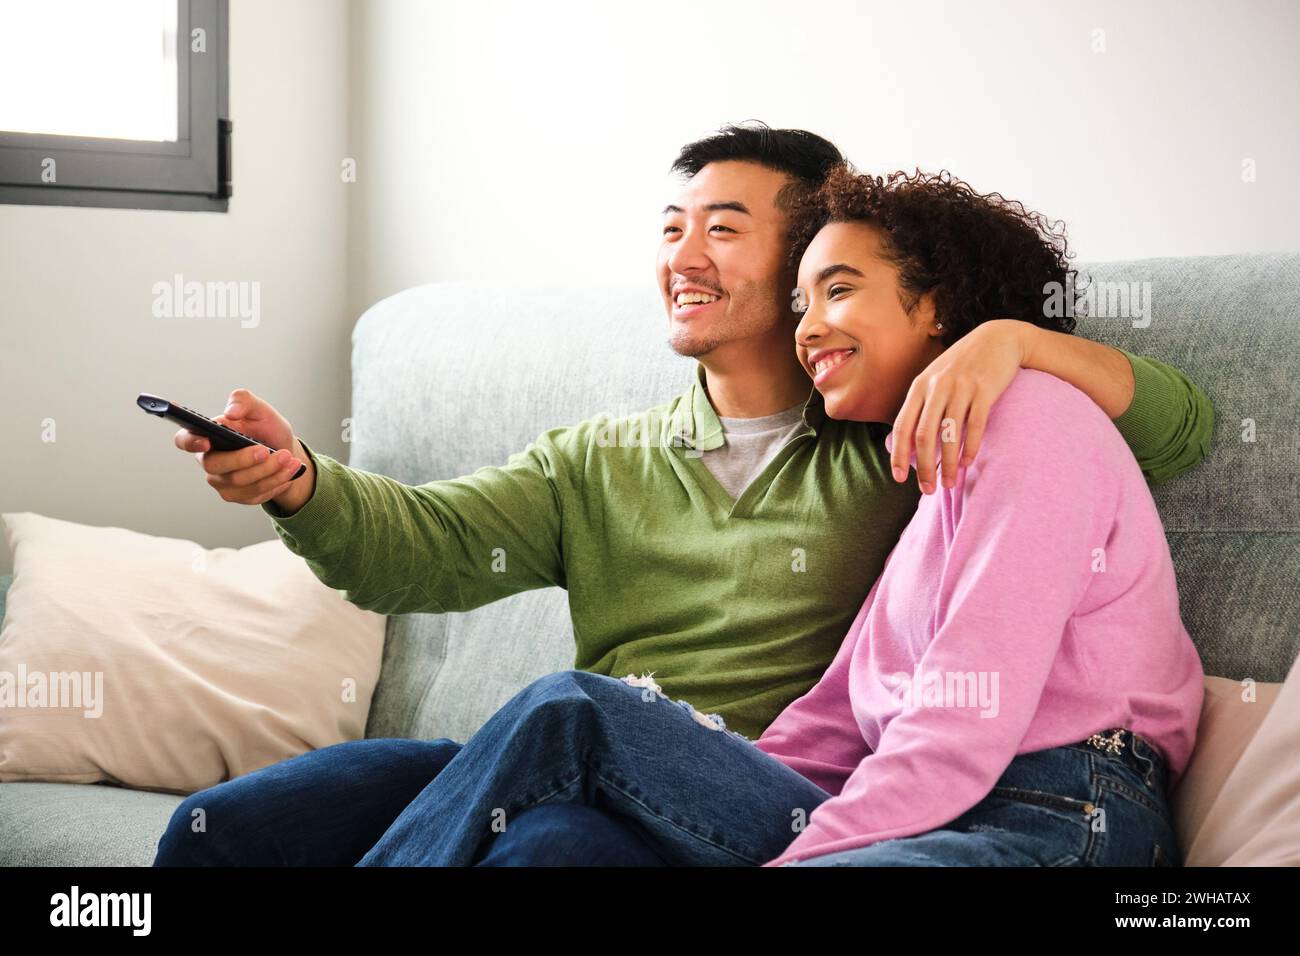 Multiethnic happy couple watching TV, movie or film together on sofa. Stock Photo